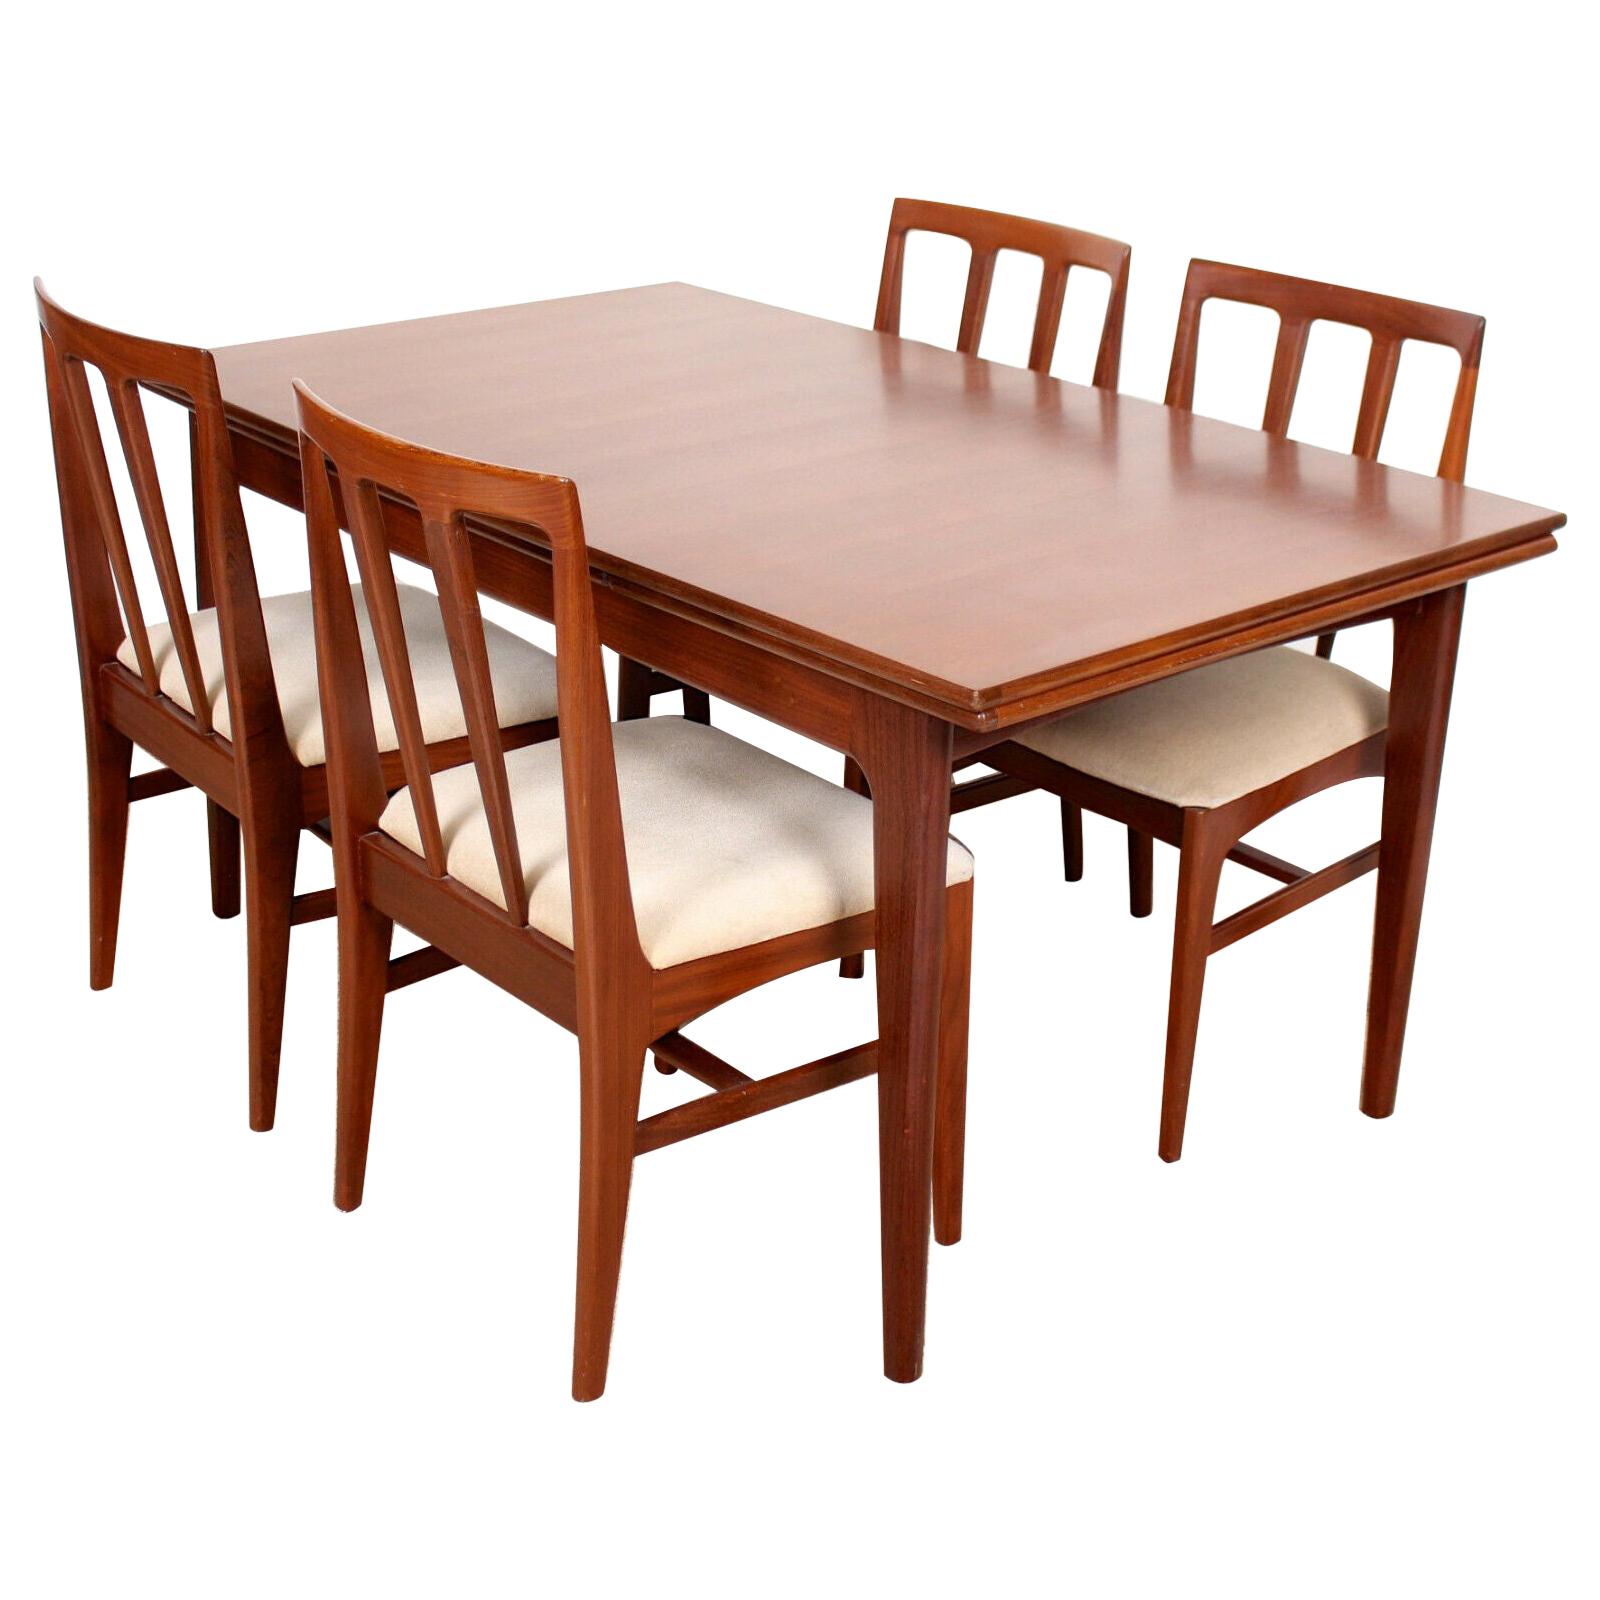 Danish Teak Dining Table and Chairs Mid-Century Modern 4 Chairs